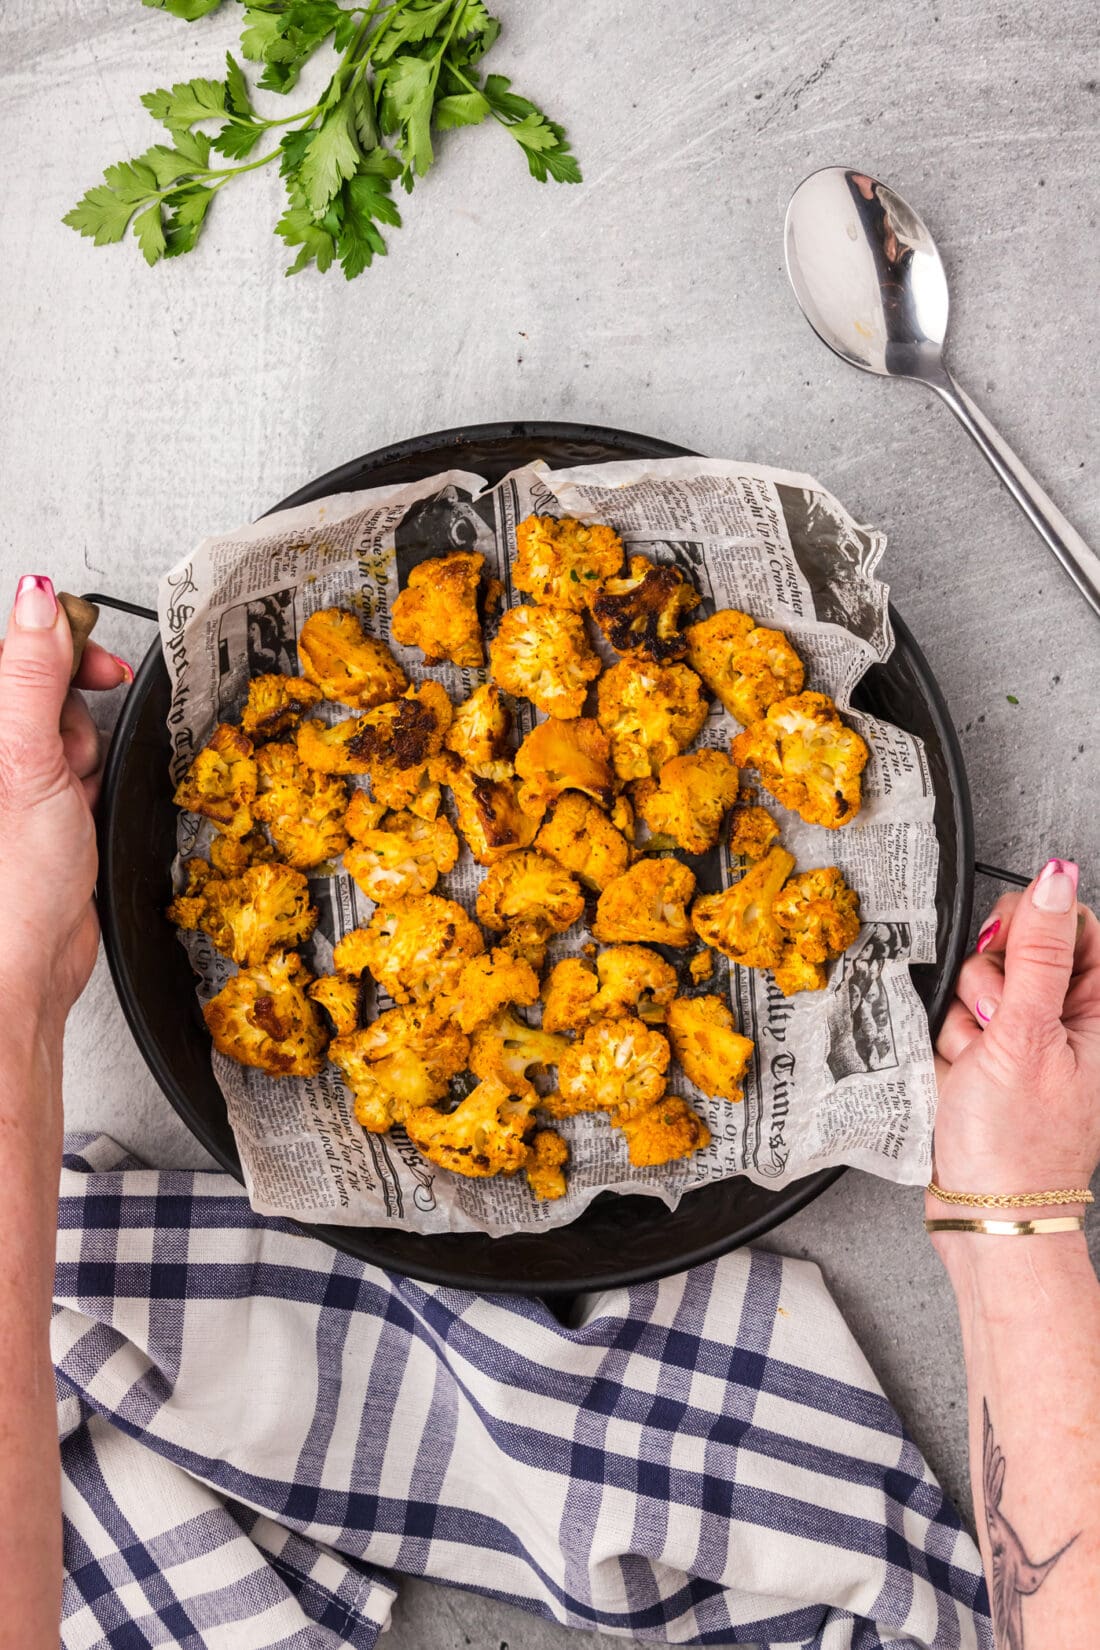 Hands holding a serving tray of Spicy Roasted Cauliflower